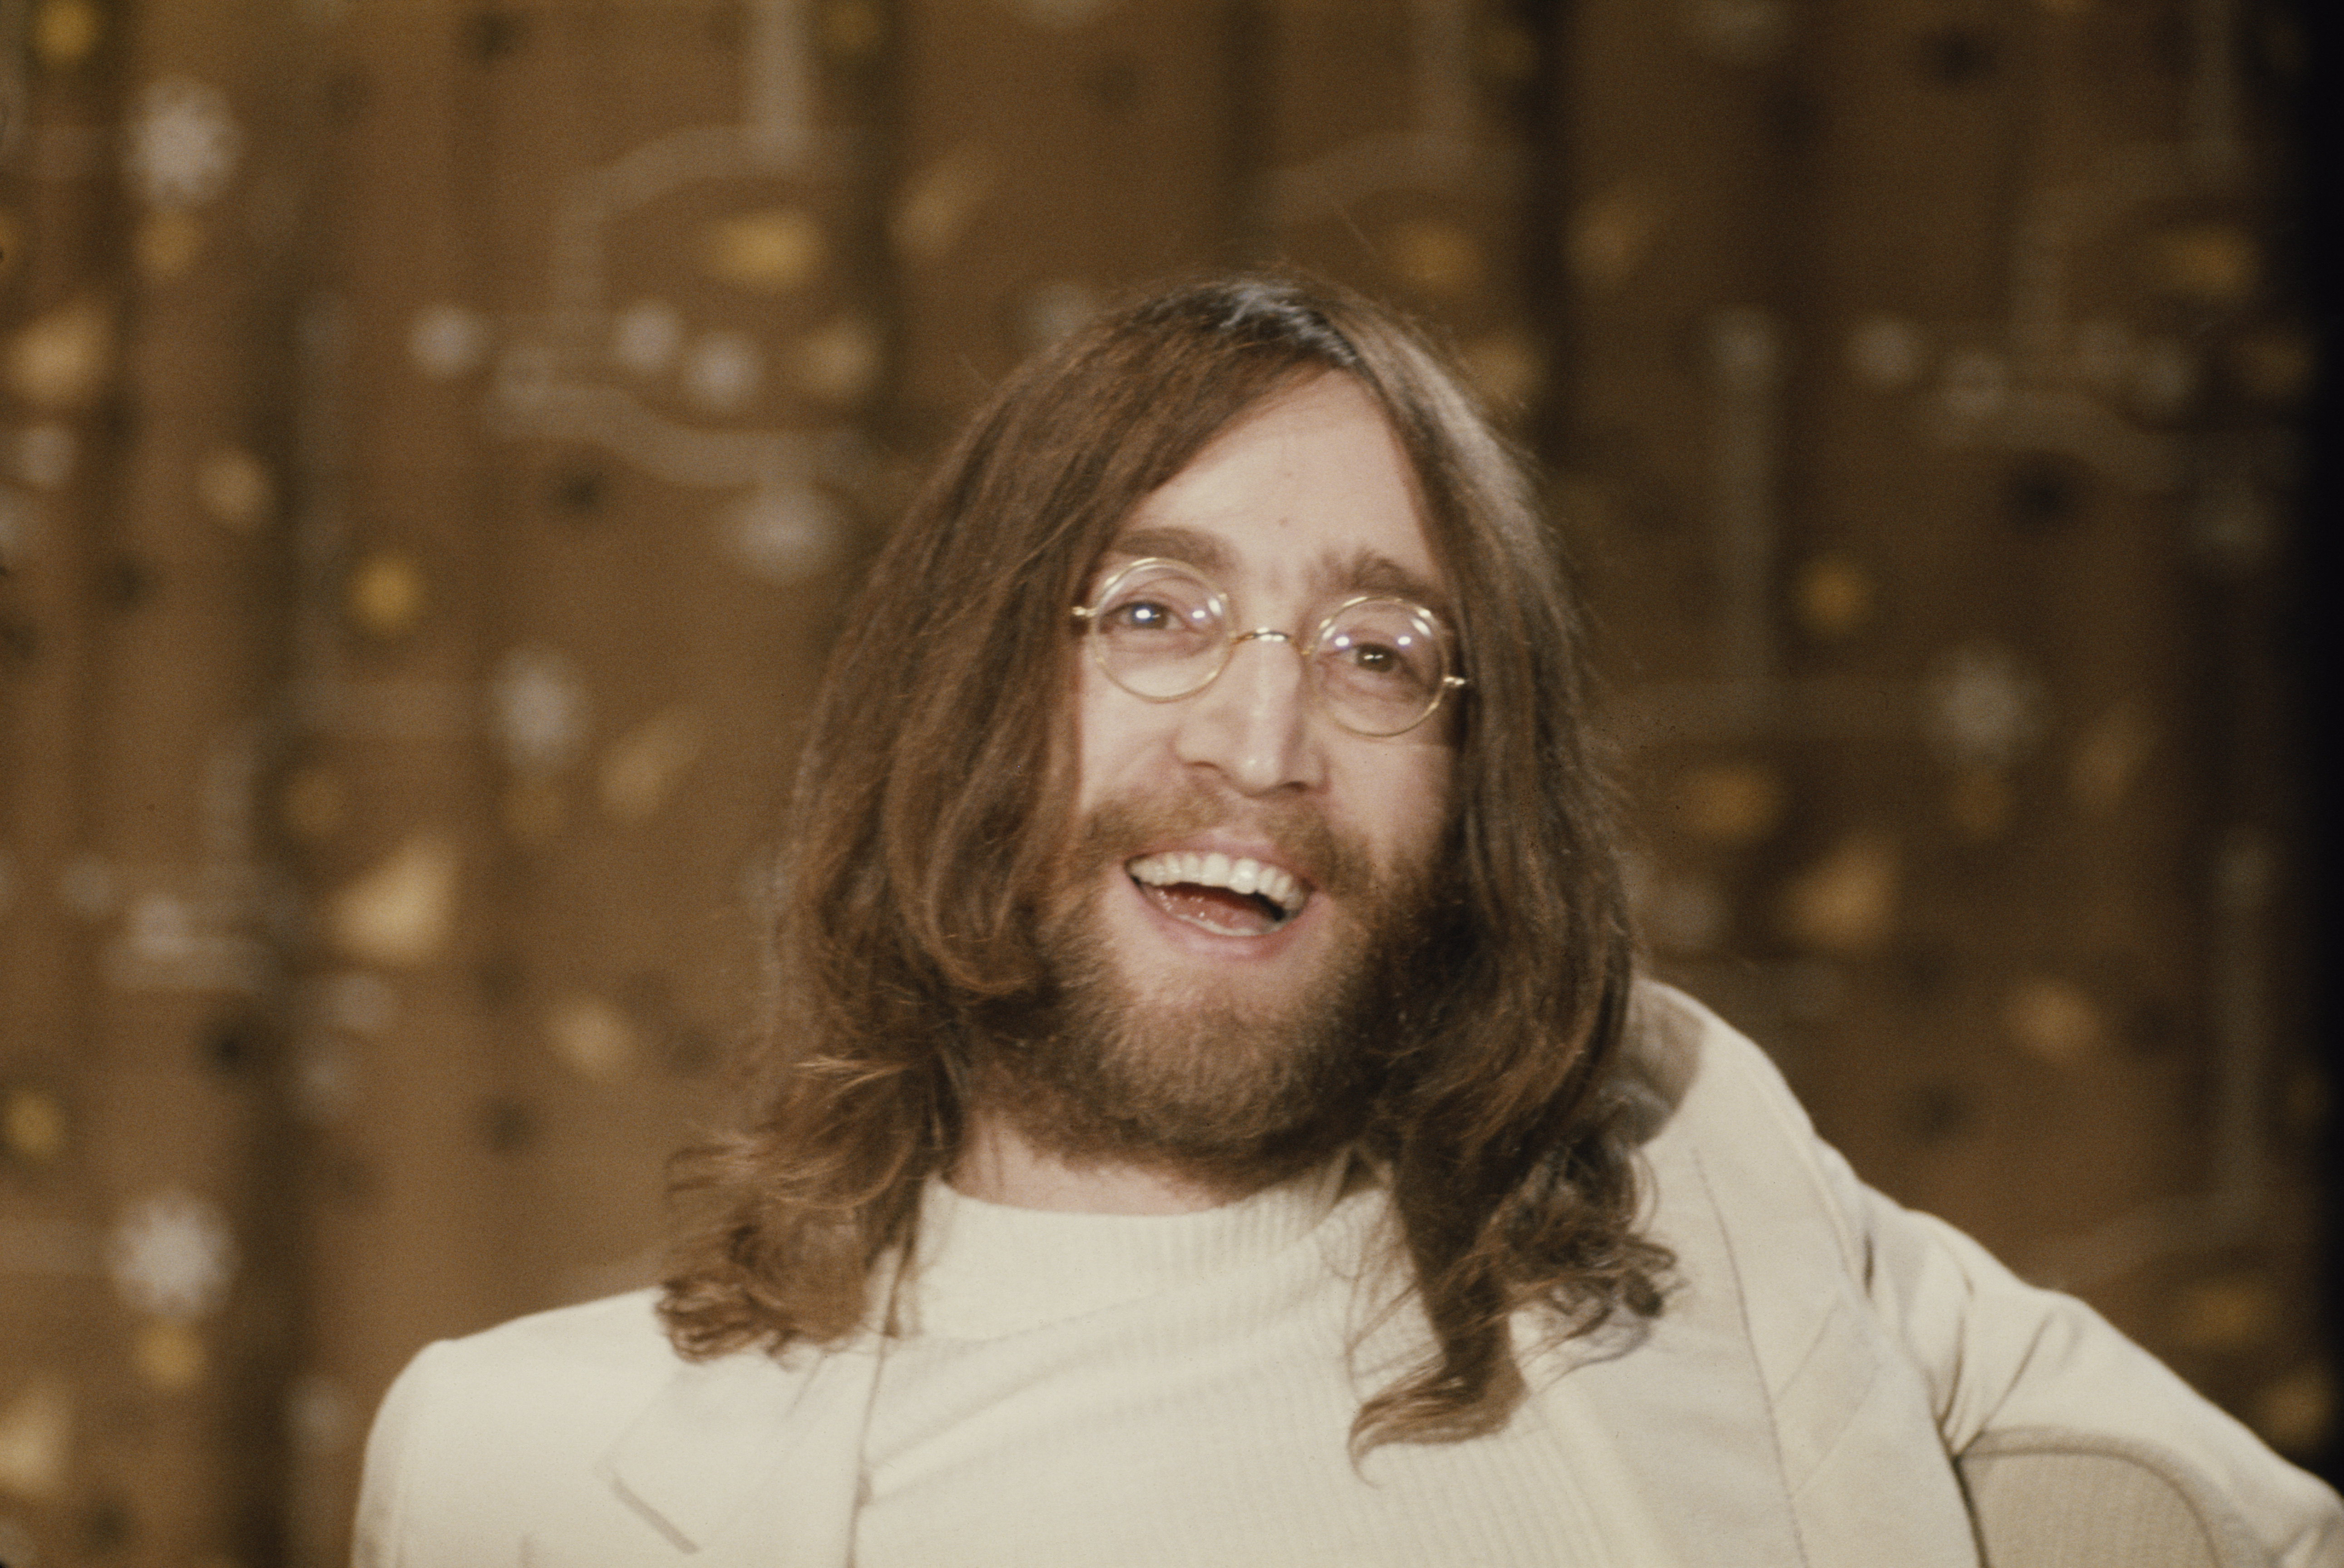 John Lennon photographed in 1969 | Source: Getty Images